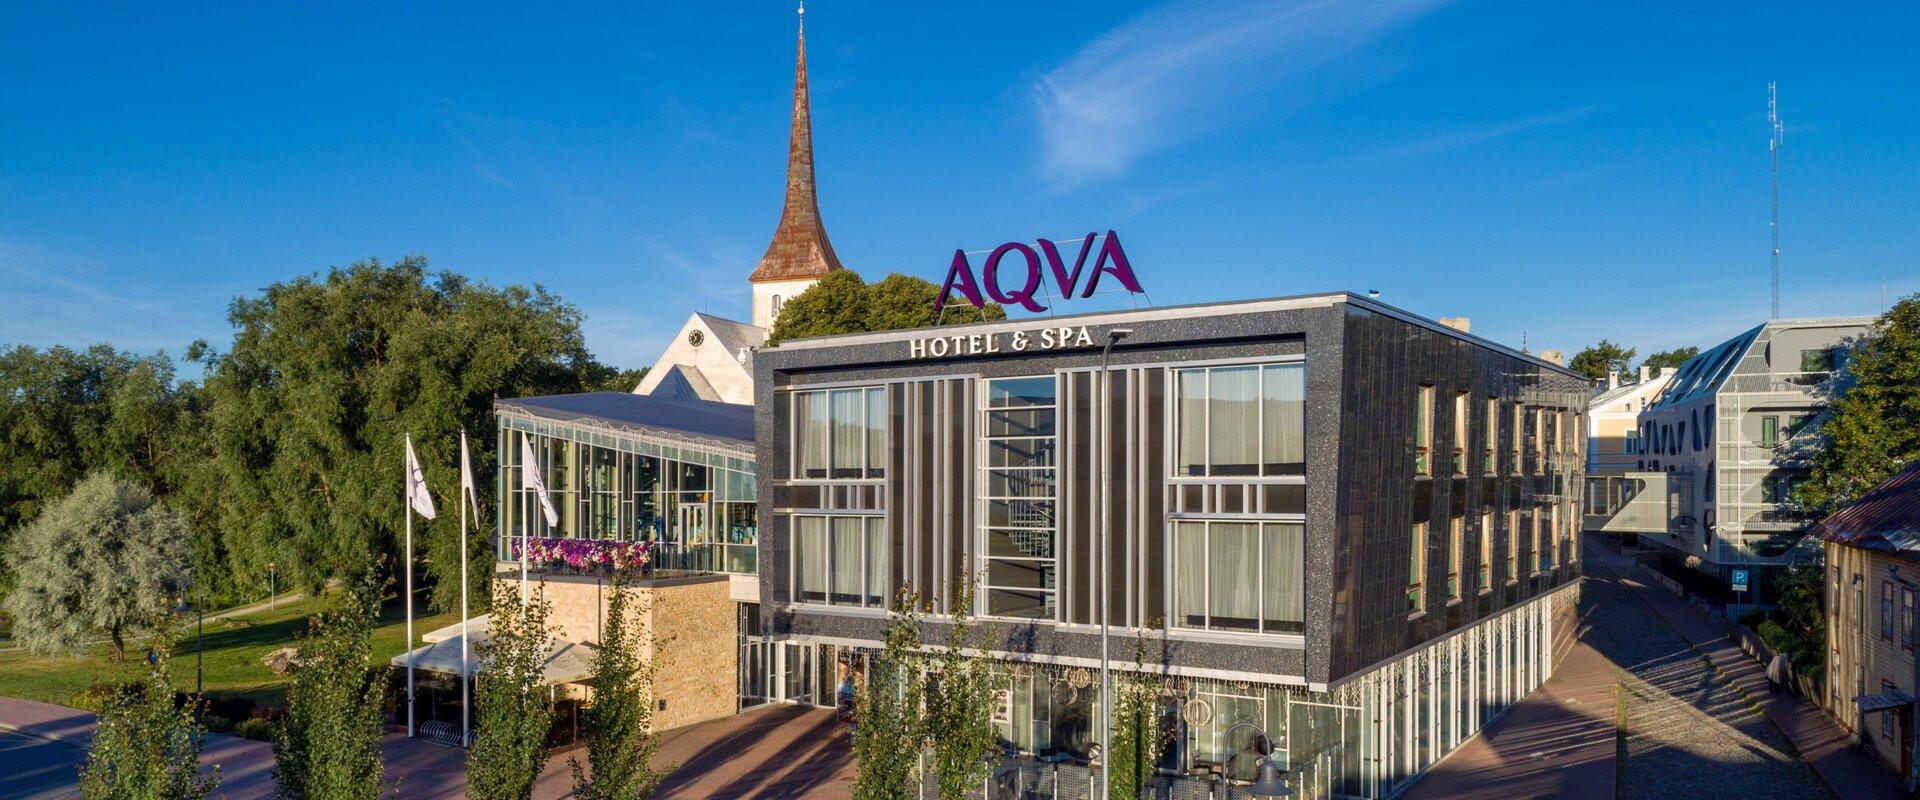 AQVA Hotel & Spa is located in the centre of Rakvere, at the foot of the historical castle. There are 120 rooms, a water and sauna centre, a gym, a co